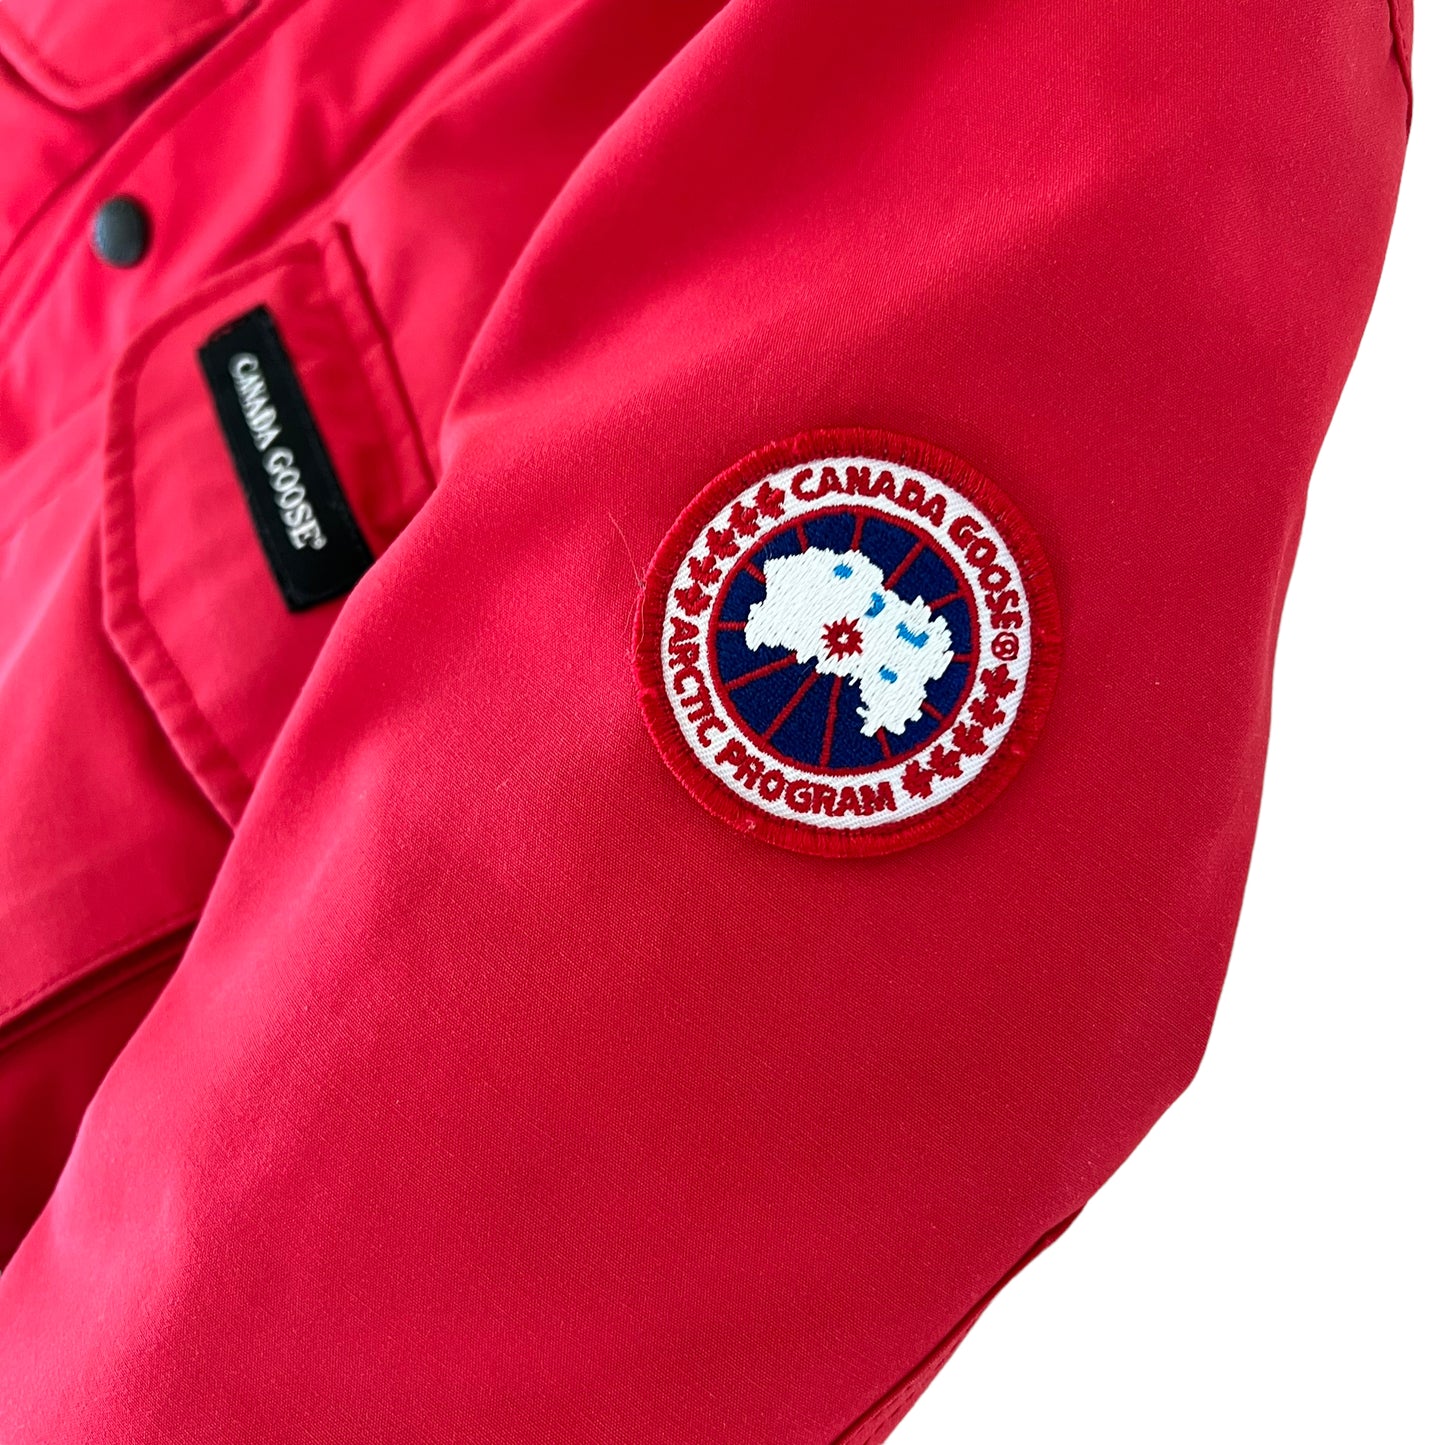 Canada Goose Kids Down Winter Jacket with Extendable Sleeves Size 2-3T